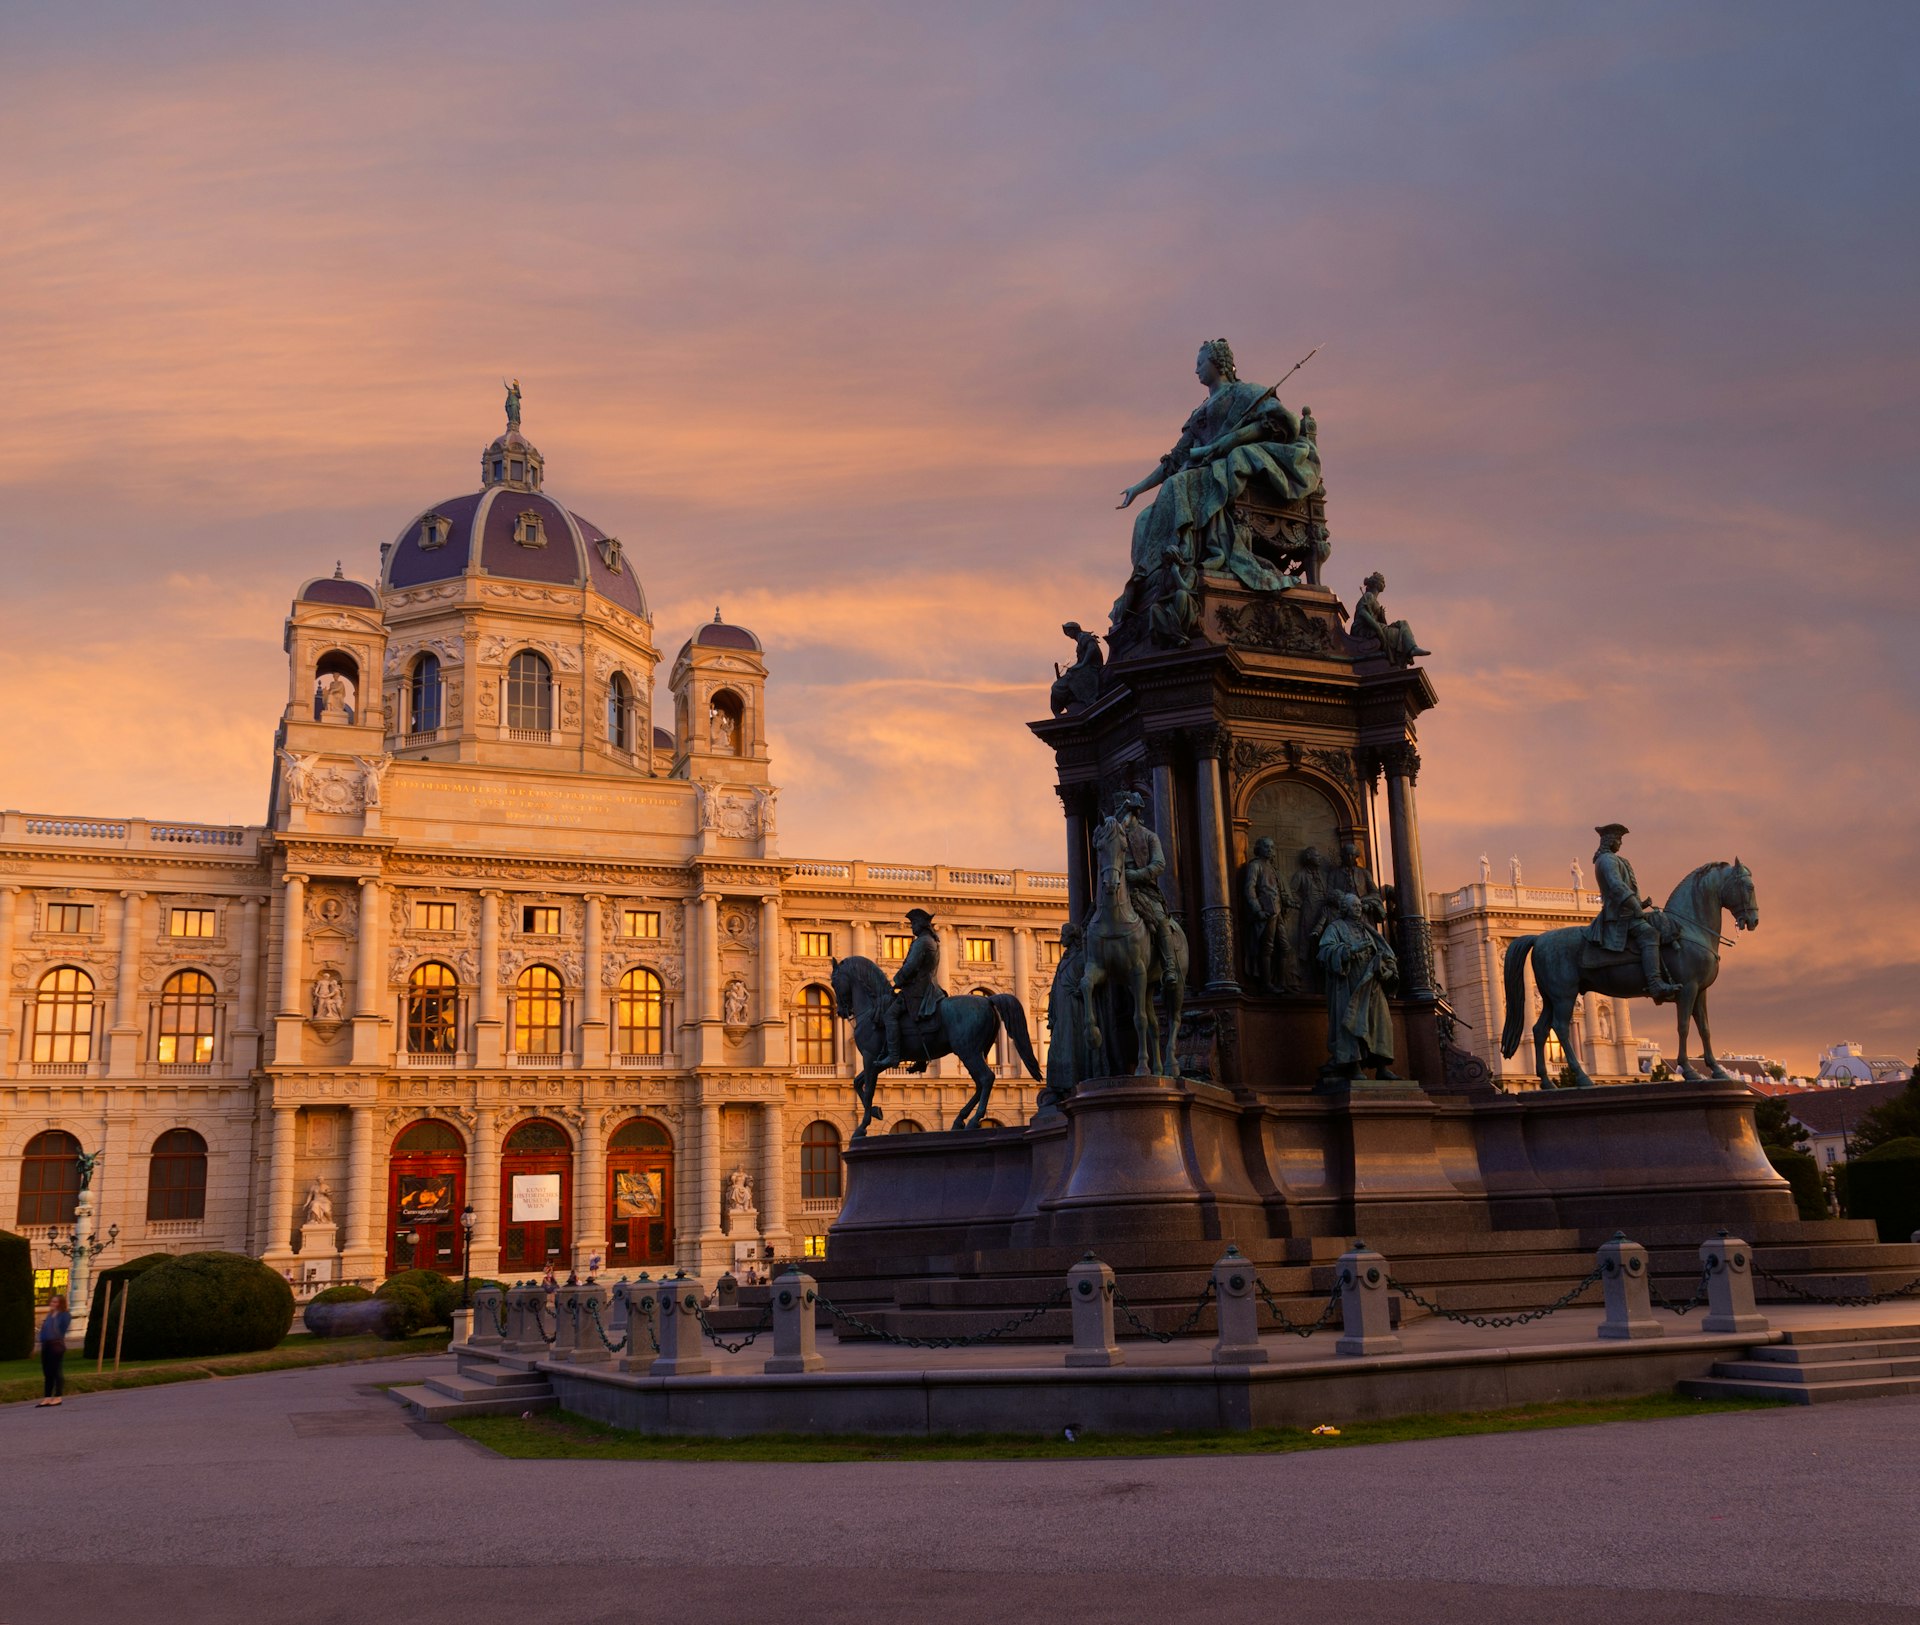 The outside of the Kunsthistorisches Museum in Vienna at Sunset